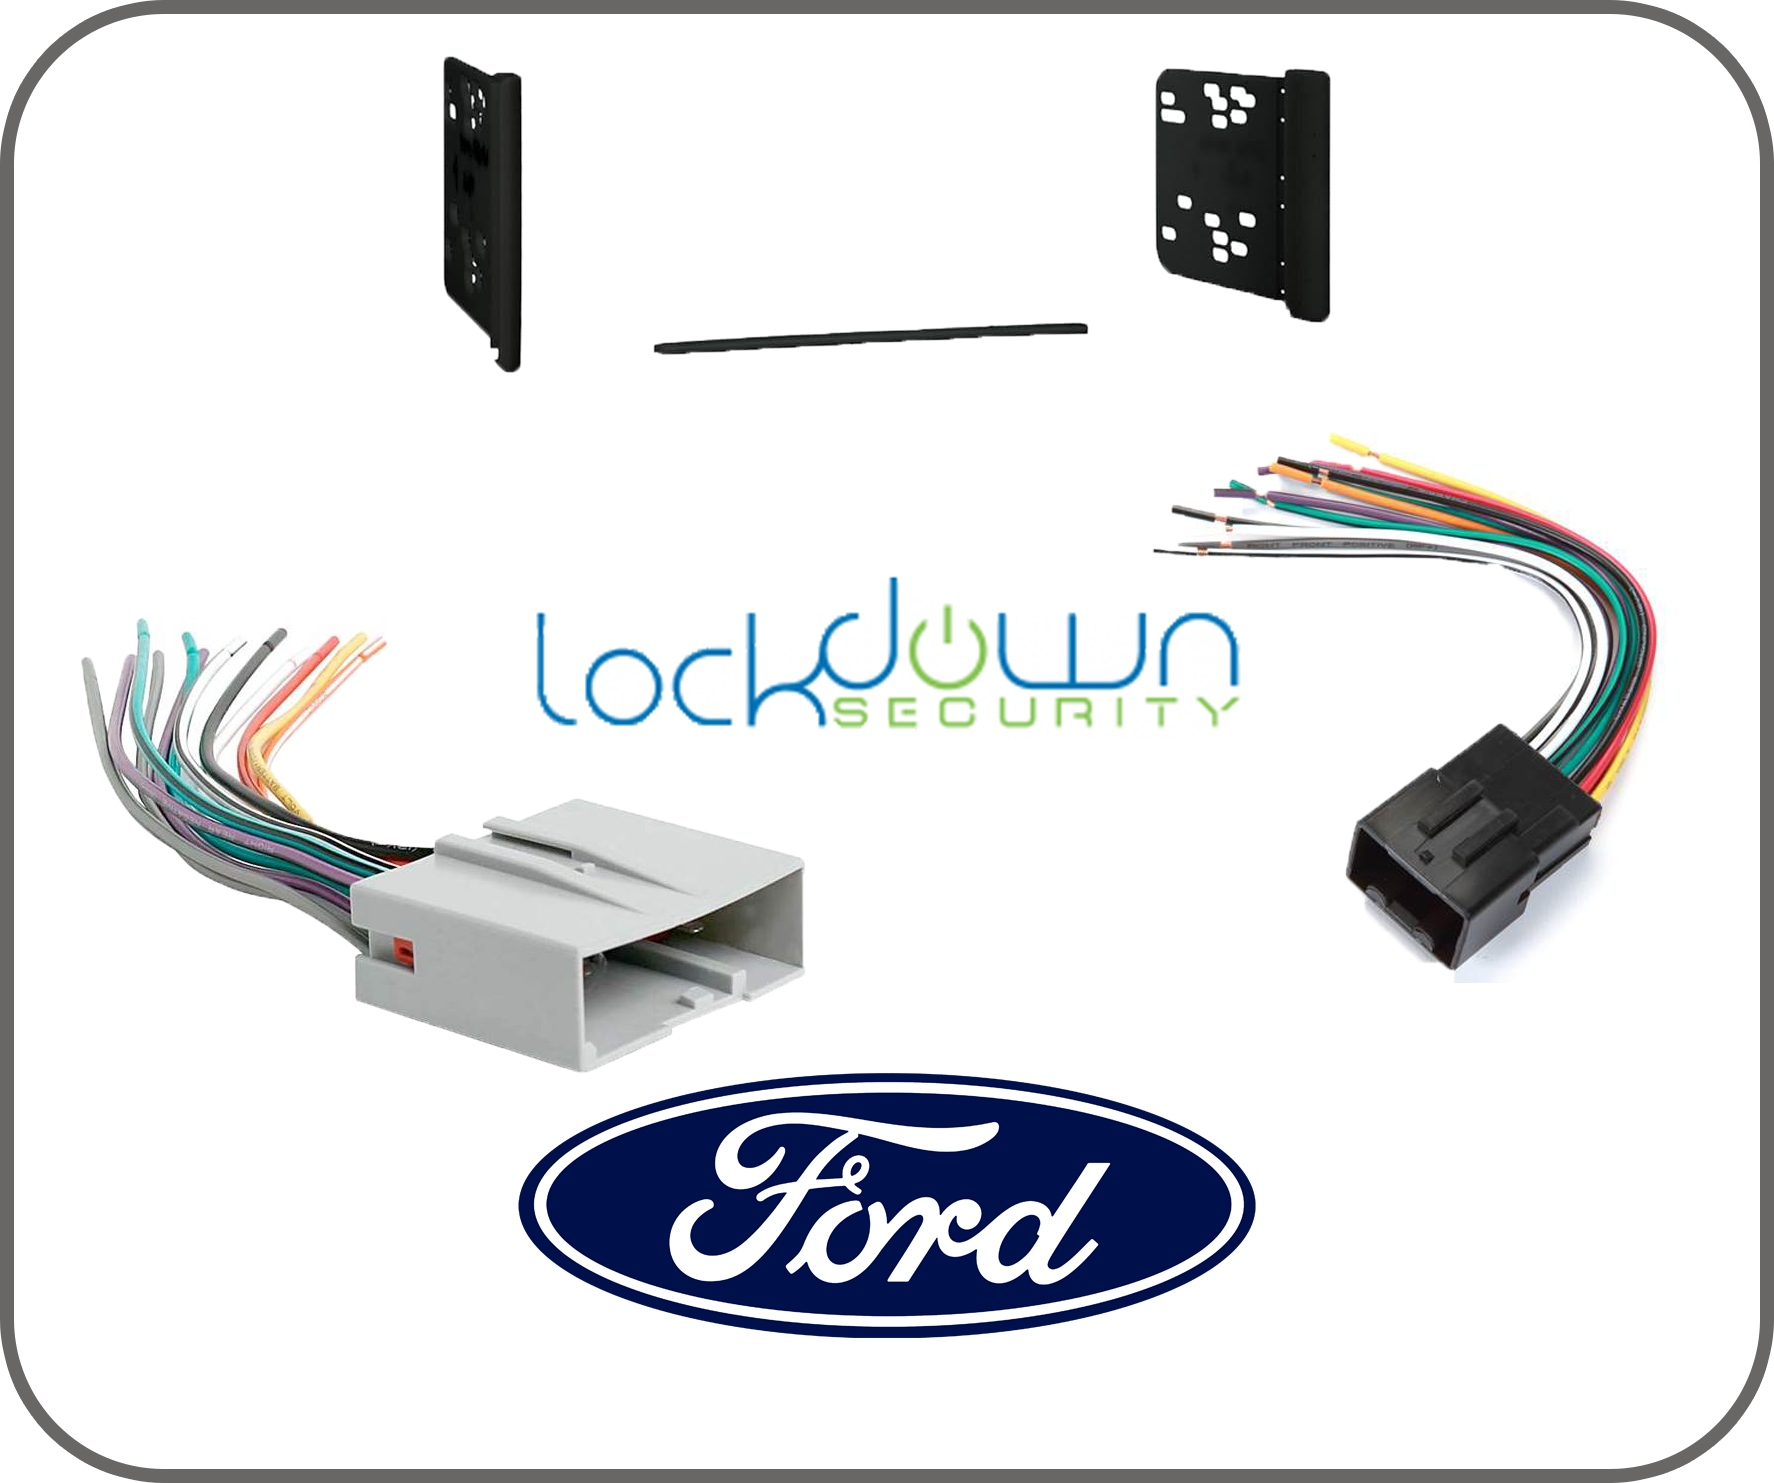 Ford Crown Victoria 1995-2011 Radio Replacement Parts Bundle ⭕ Includes Metra 95-5817 Mount Kit, Metra 70-5520 Wire Harness, Metra 70-1771 Wire Harness